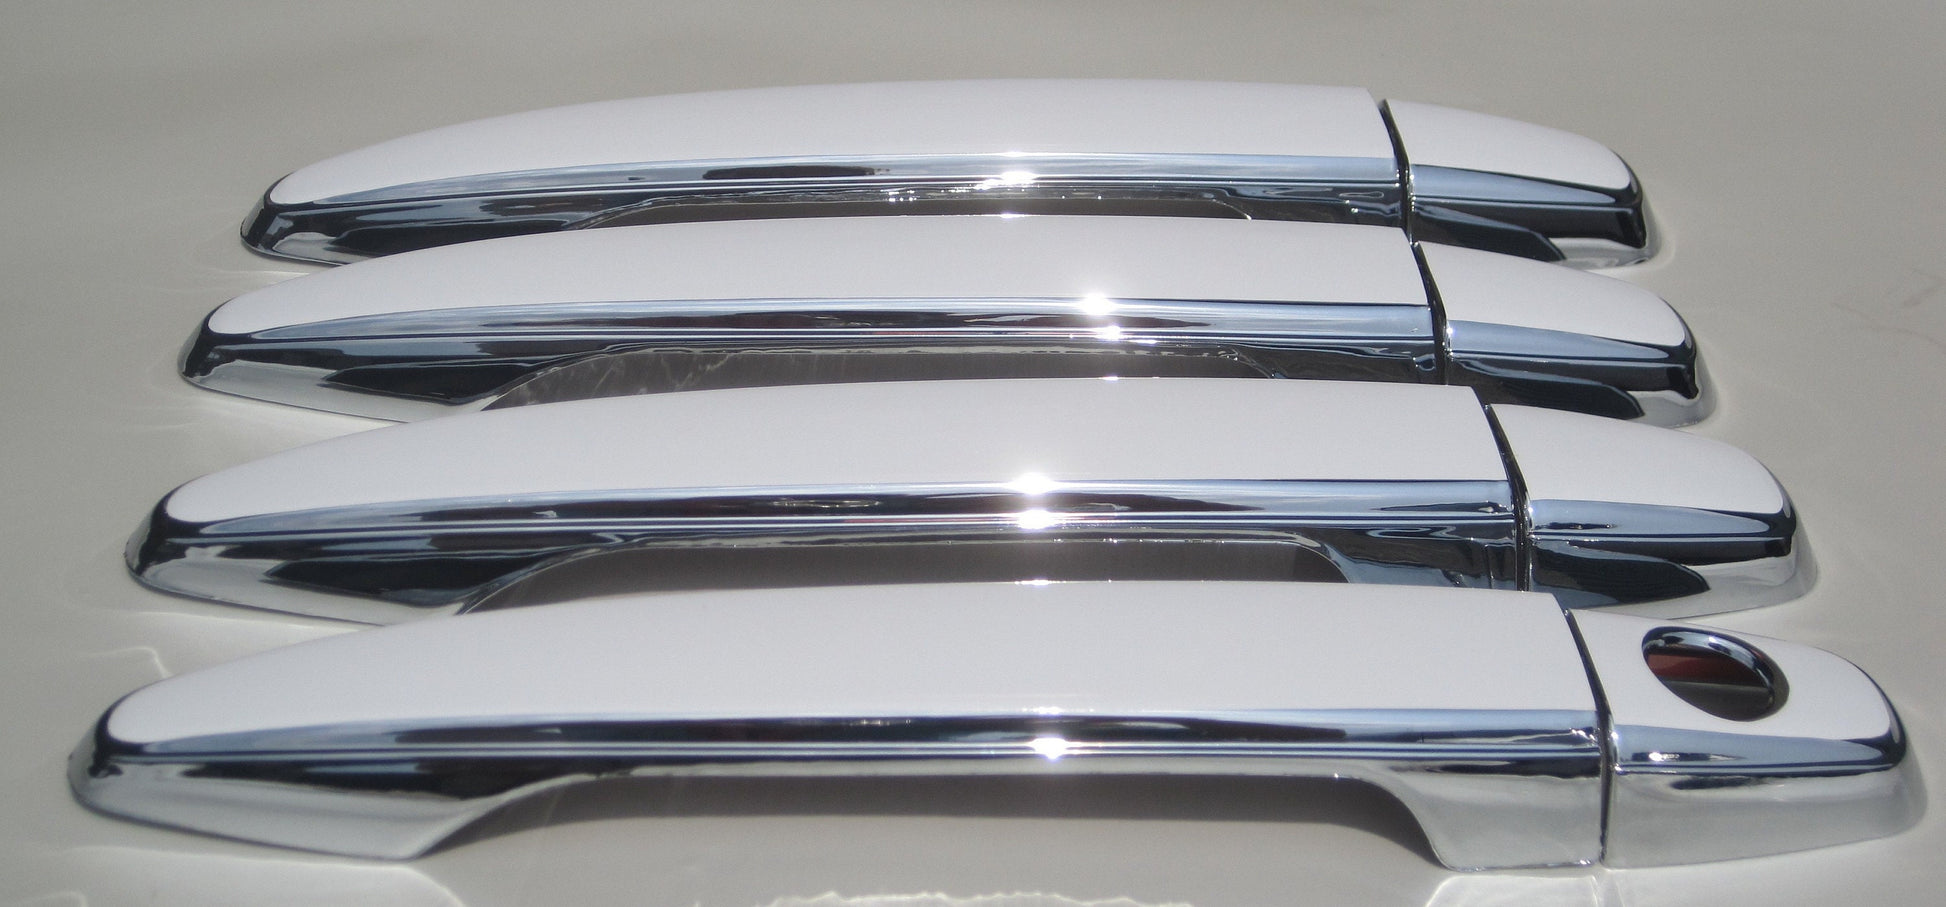 Full Set of Custom Black OR Chrome Door Handle Overlays / Covers For 2003 - 2009 Toyota 4Runner - Choose the Color of the Middle Insert